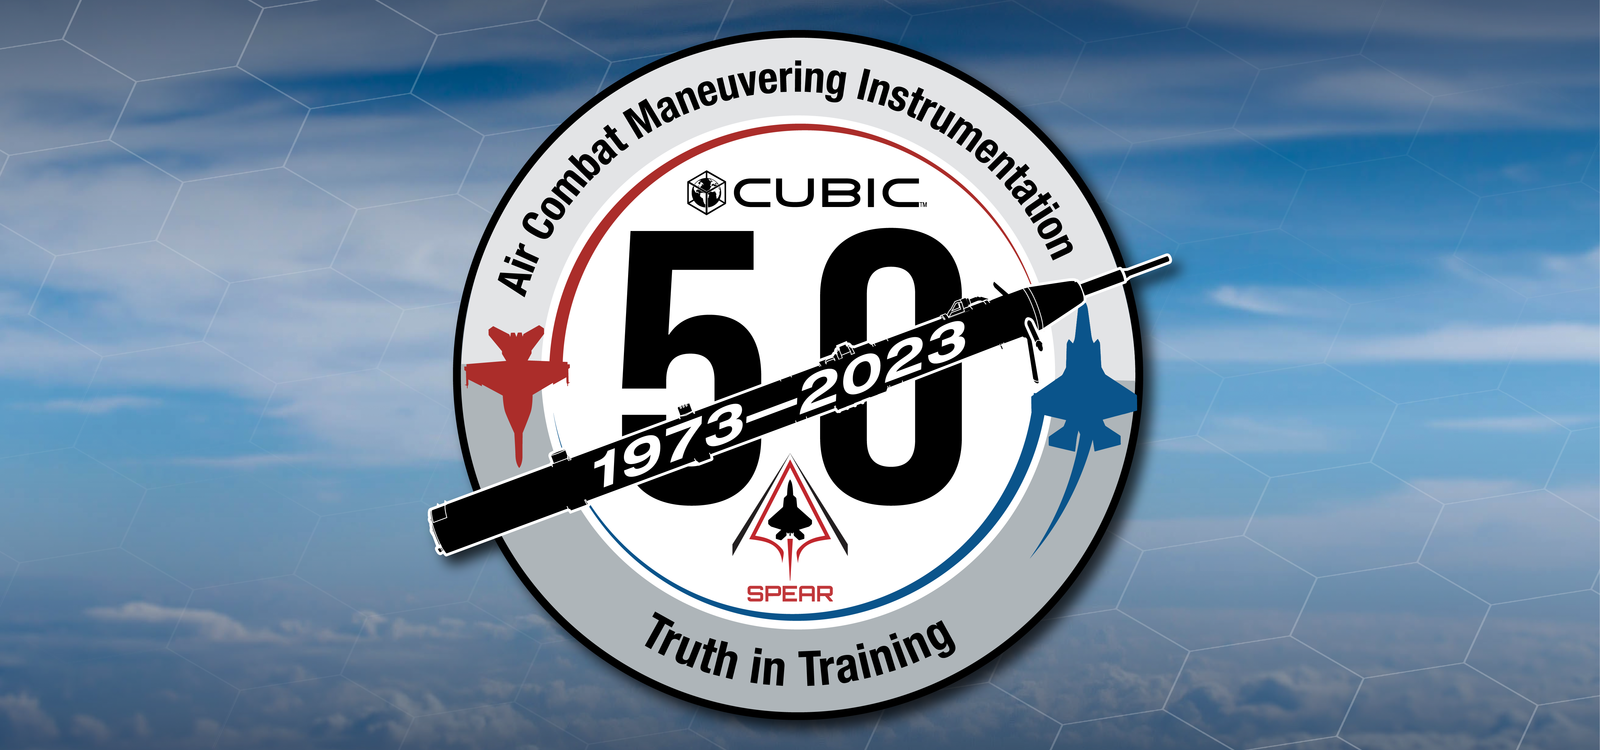 Cubic Celebrates the 50-year Evolution of Air Combat Maneuvering Instrumentation (ACMI) – Truth in Training